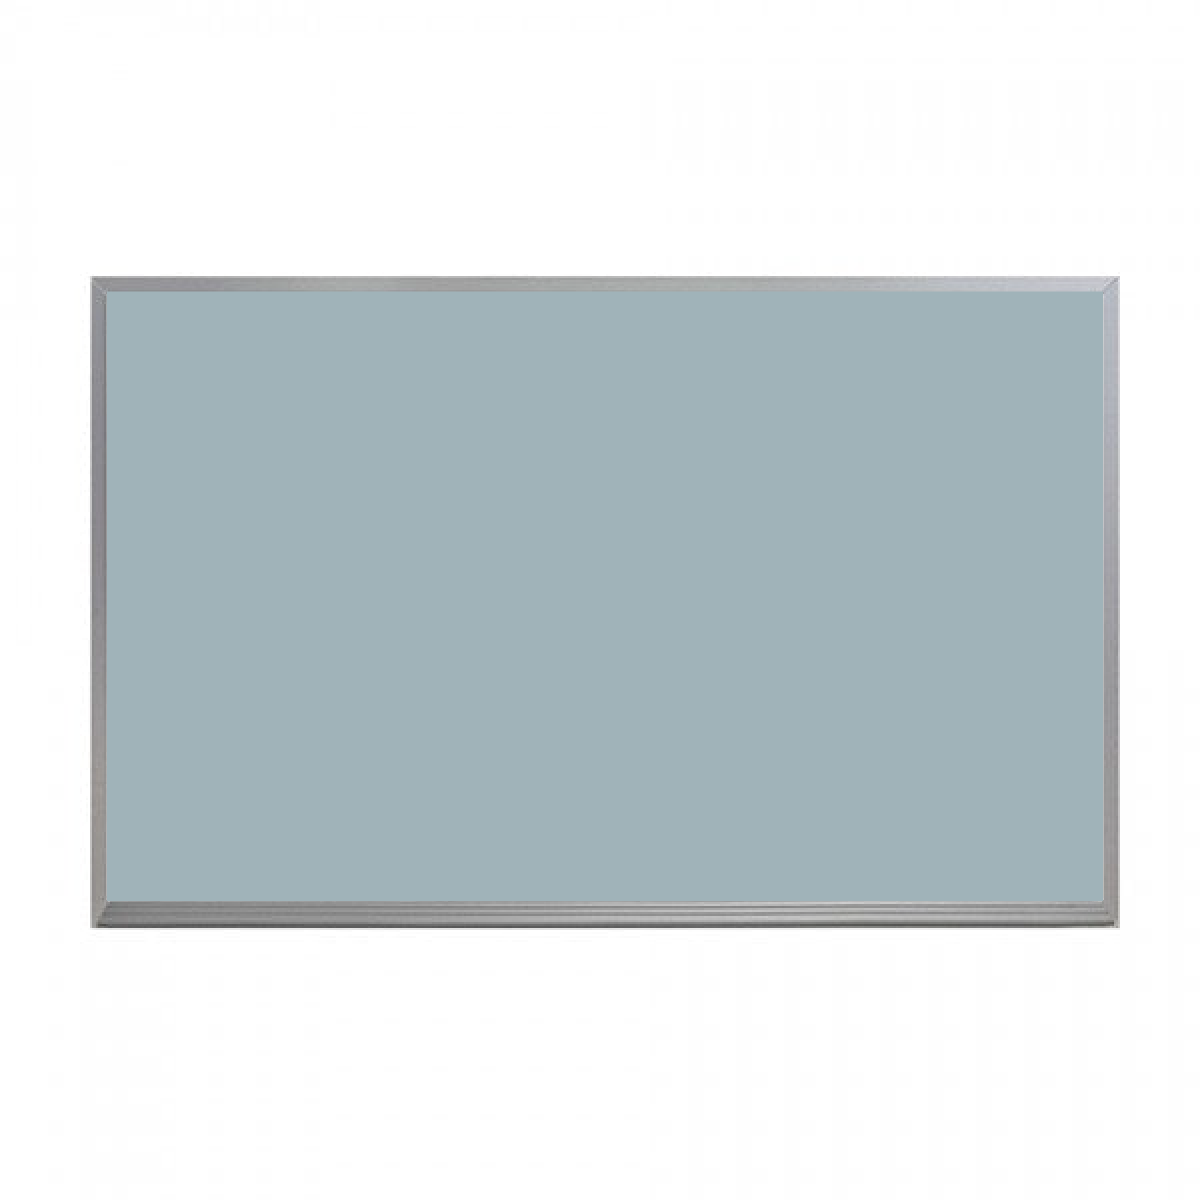 Satin Aluminum Frame | Clearwater | Landscape Color-Rite Magnetic Whiteboard